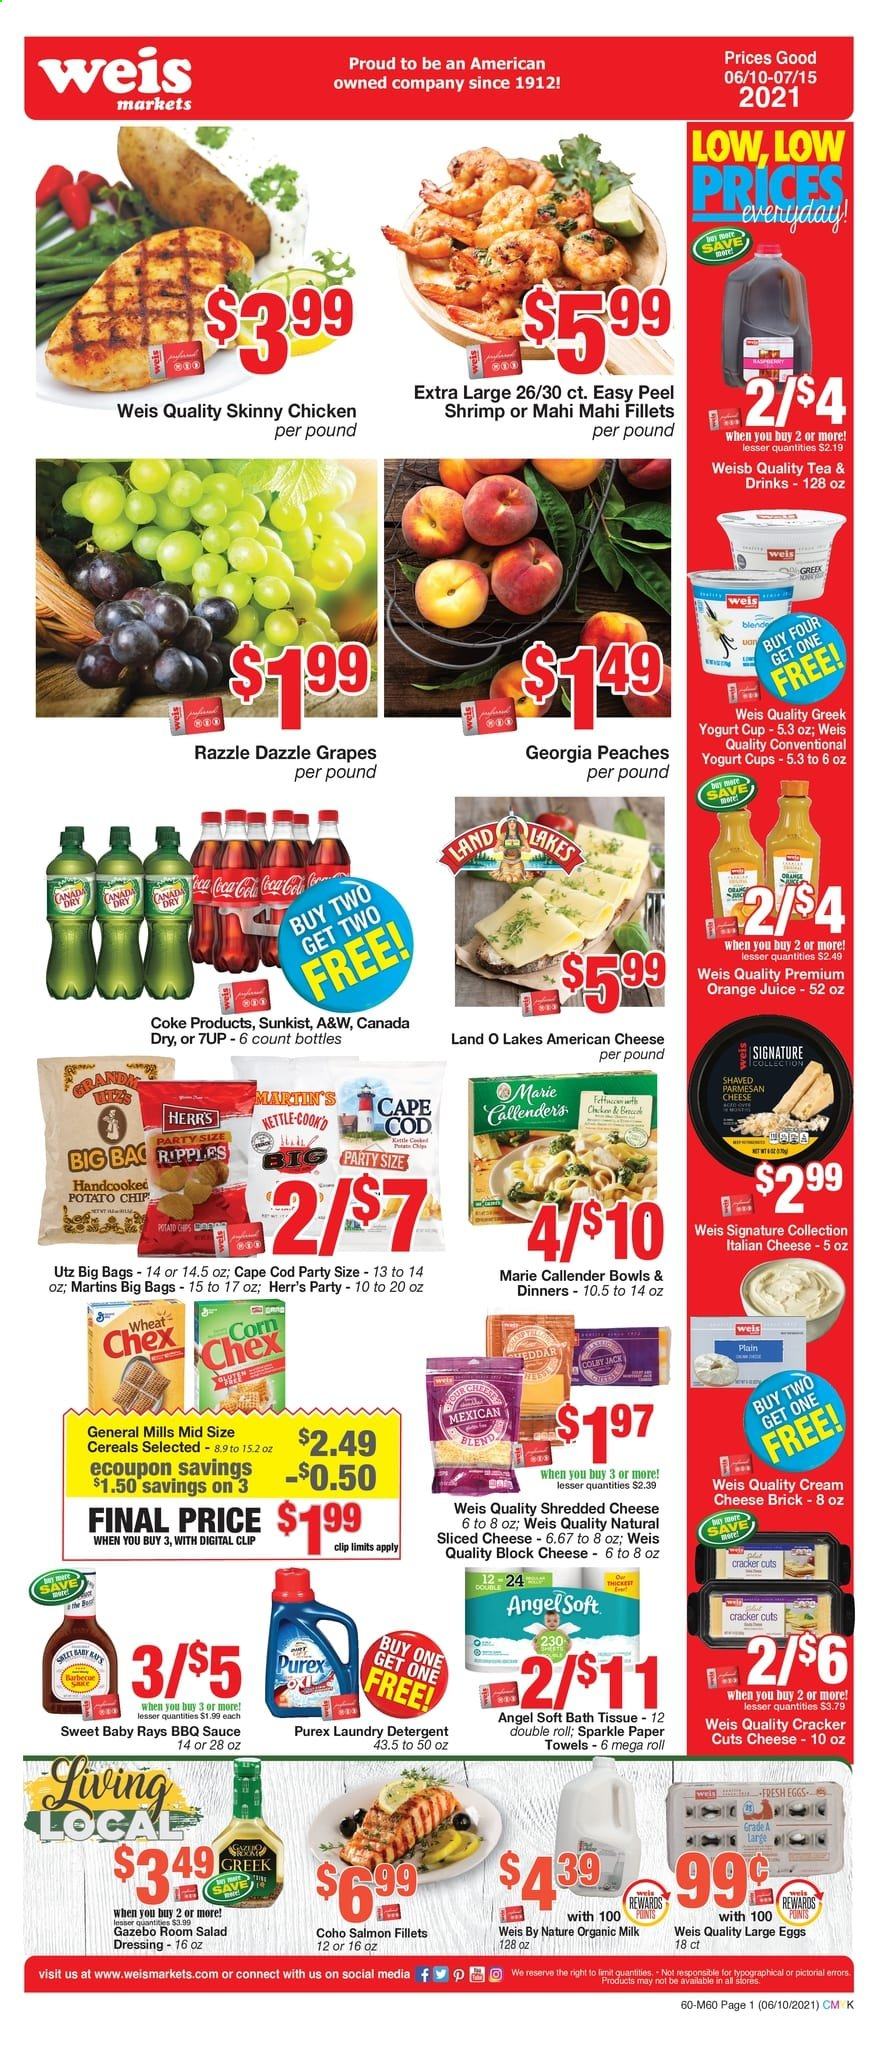 thumbnail - Weis Flyer - 06/10/2021 - 07/15/2021 - Sales products - corn, grapes, cod, mahi mahi, salmon, salmon fillet, shrimps, sauce, Marie Callender's, american cheese, sliced cheese, parmesan, yoghurt, organic milk, large eggs, crackers, BBQ sauce, salad dressing, dressing, Canada Dry, orange juice, juice, 7UP, A&W, bath tissue, kitchen towels, paper towels, detergent, laundry detergent, Purex, peaches. Page 1.